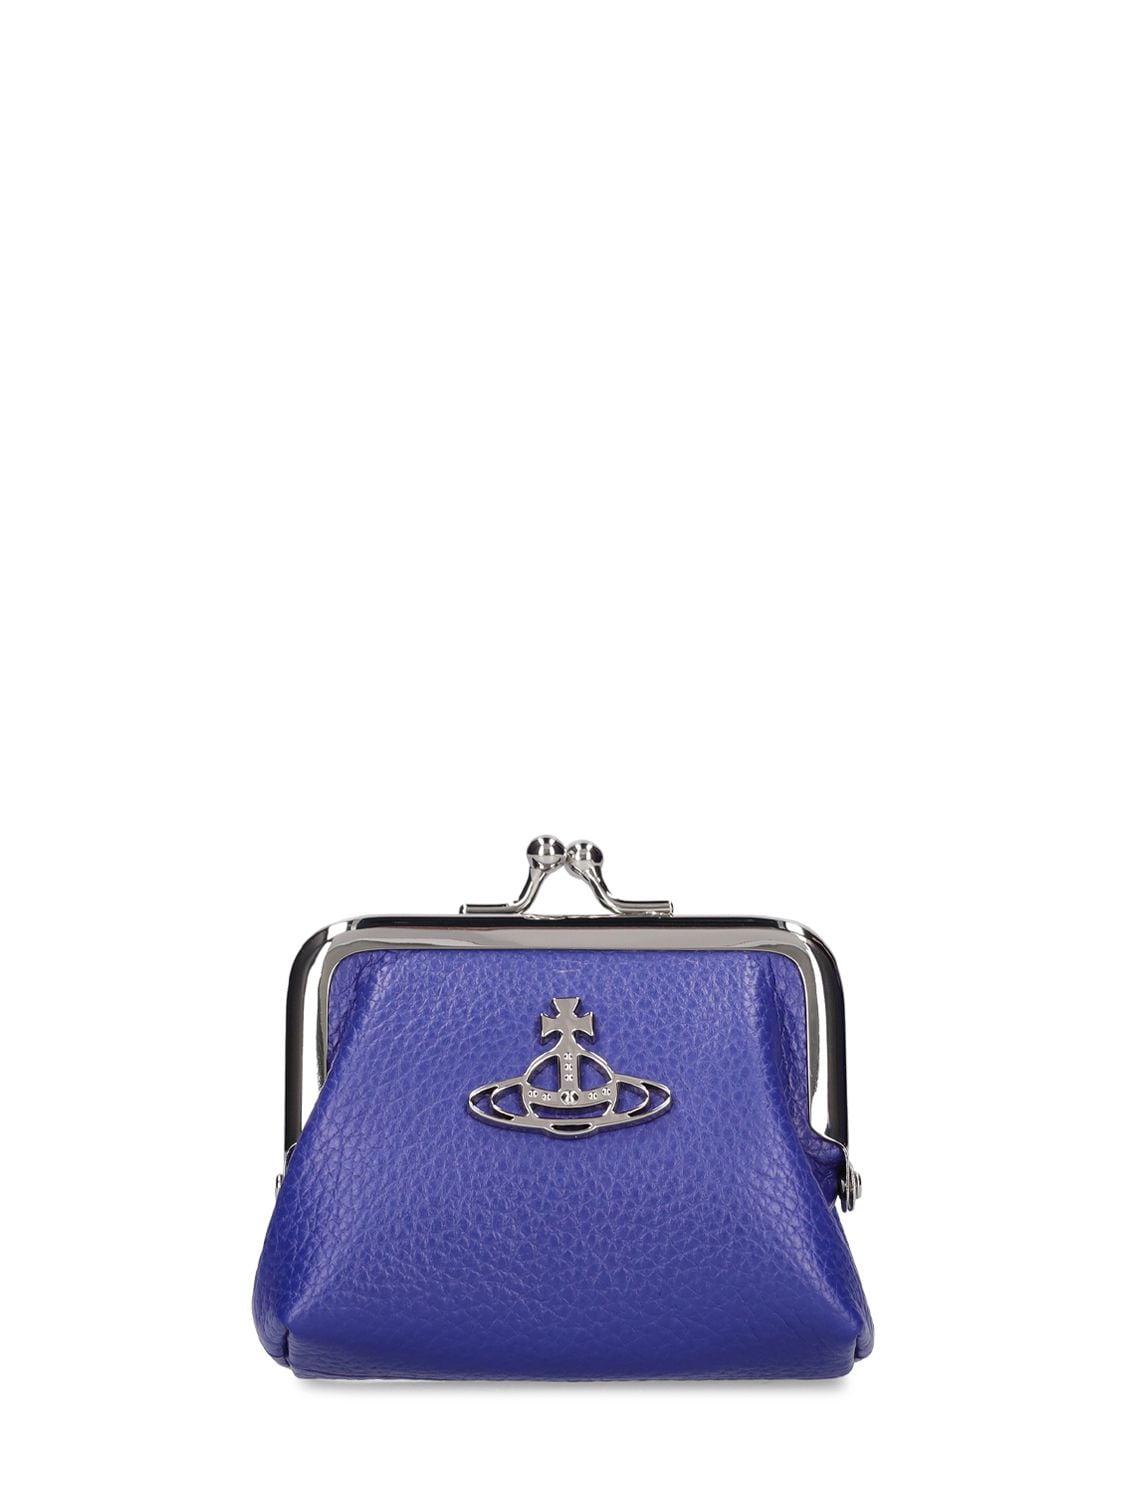 Vivienne Westwood Mini Grained Leather Purse In Blue